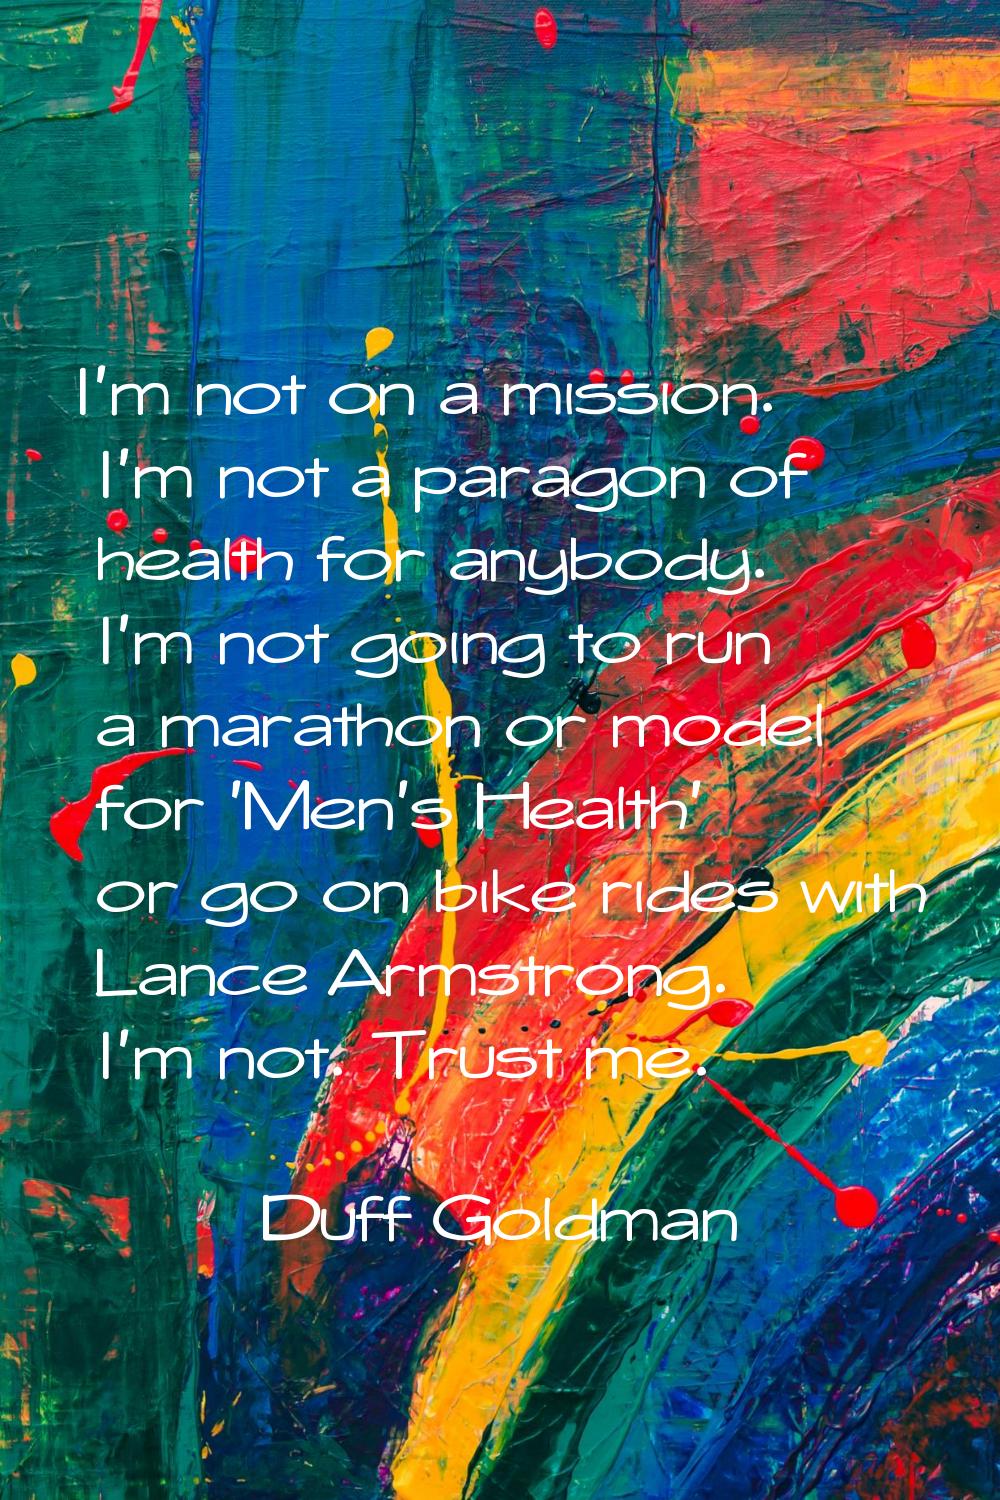 I'm not on a mission. I'm not a paragon of health for anybody. I'm not going to run a marathon or m